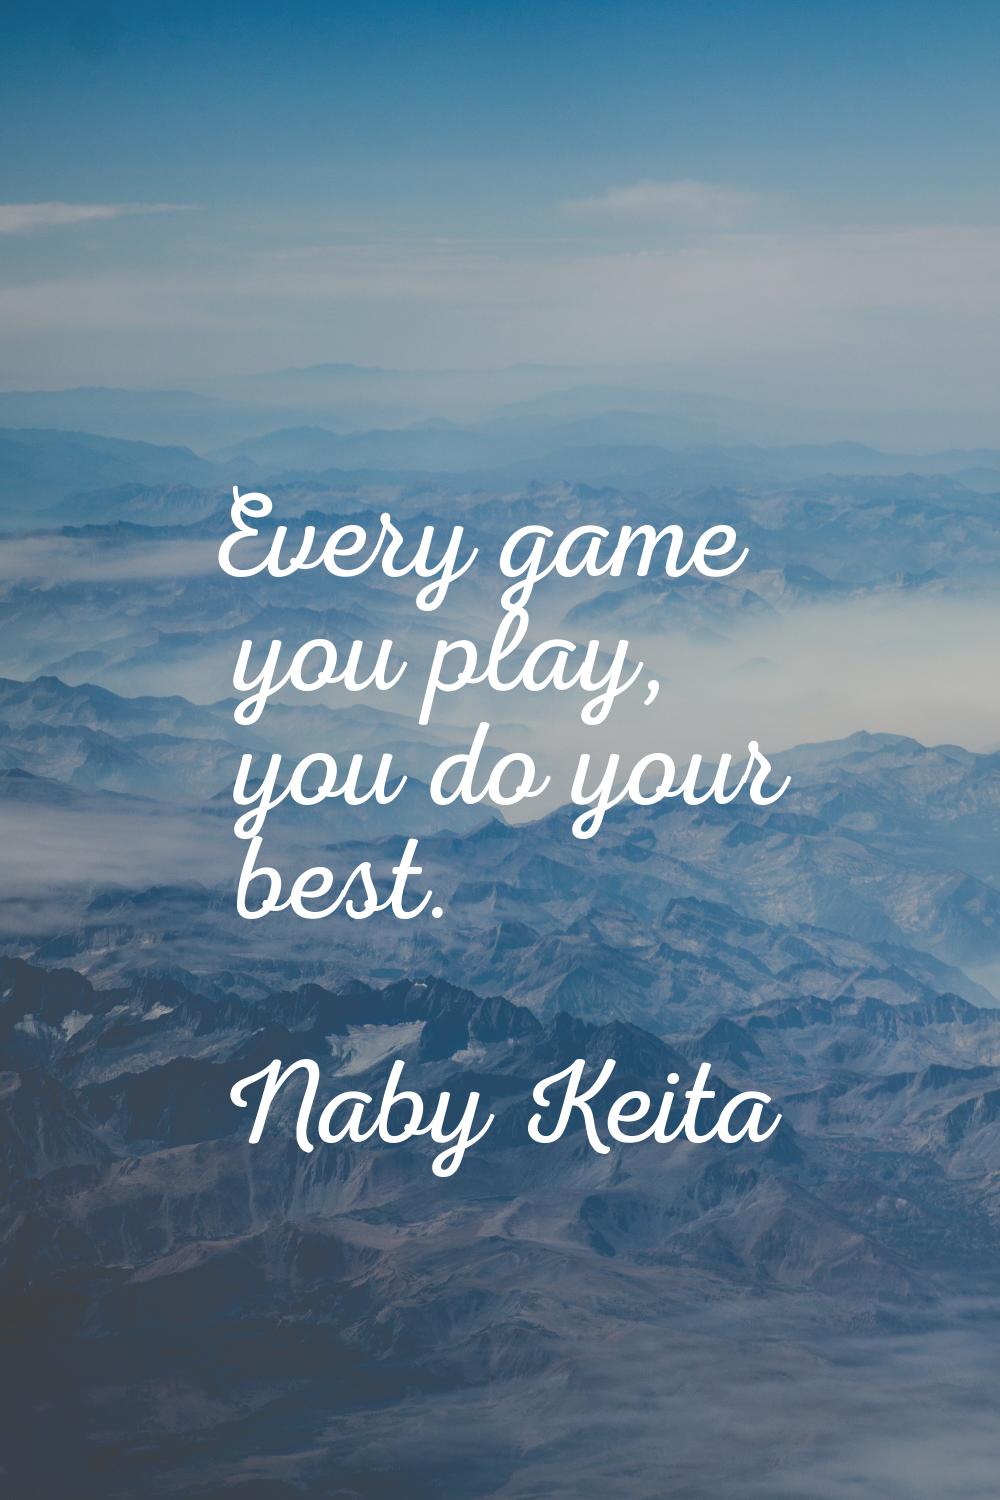 Every game you play, you do your best.